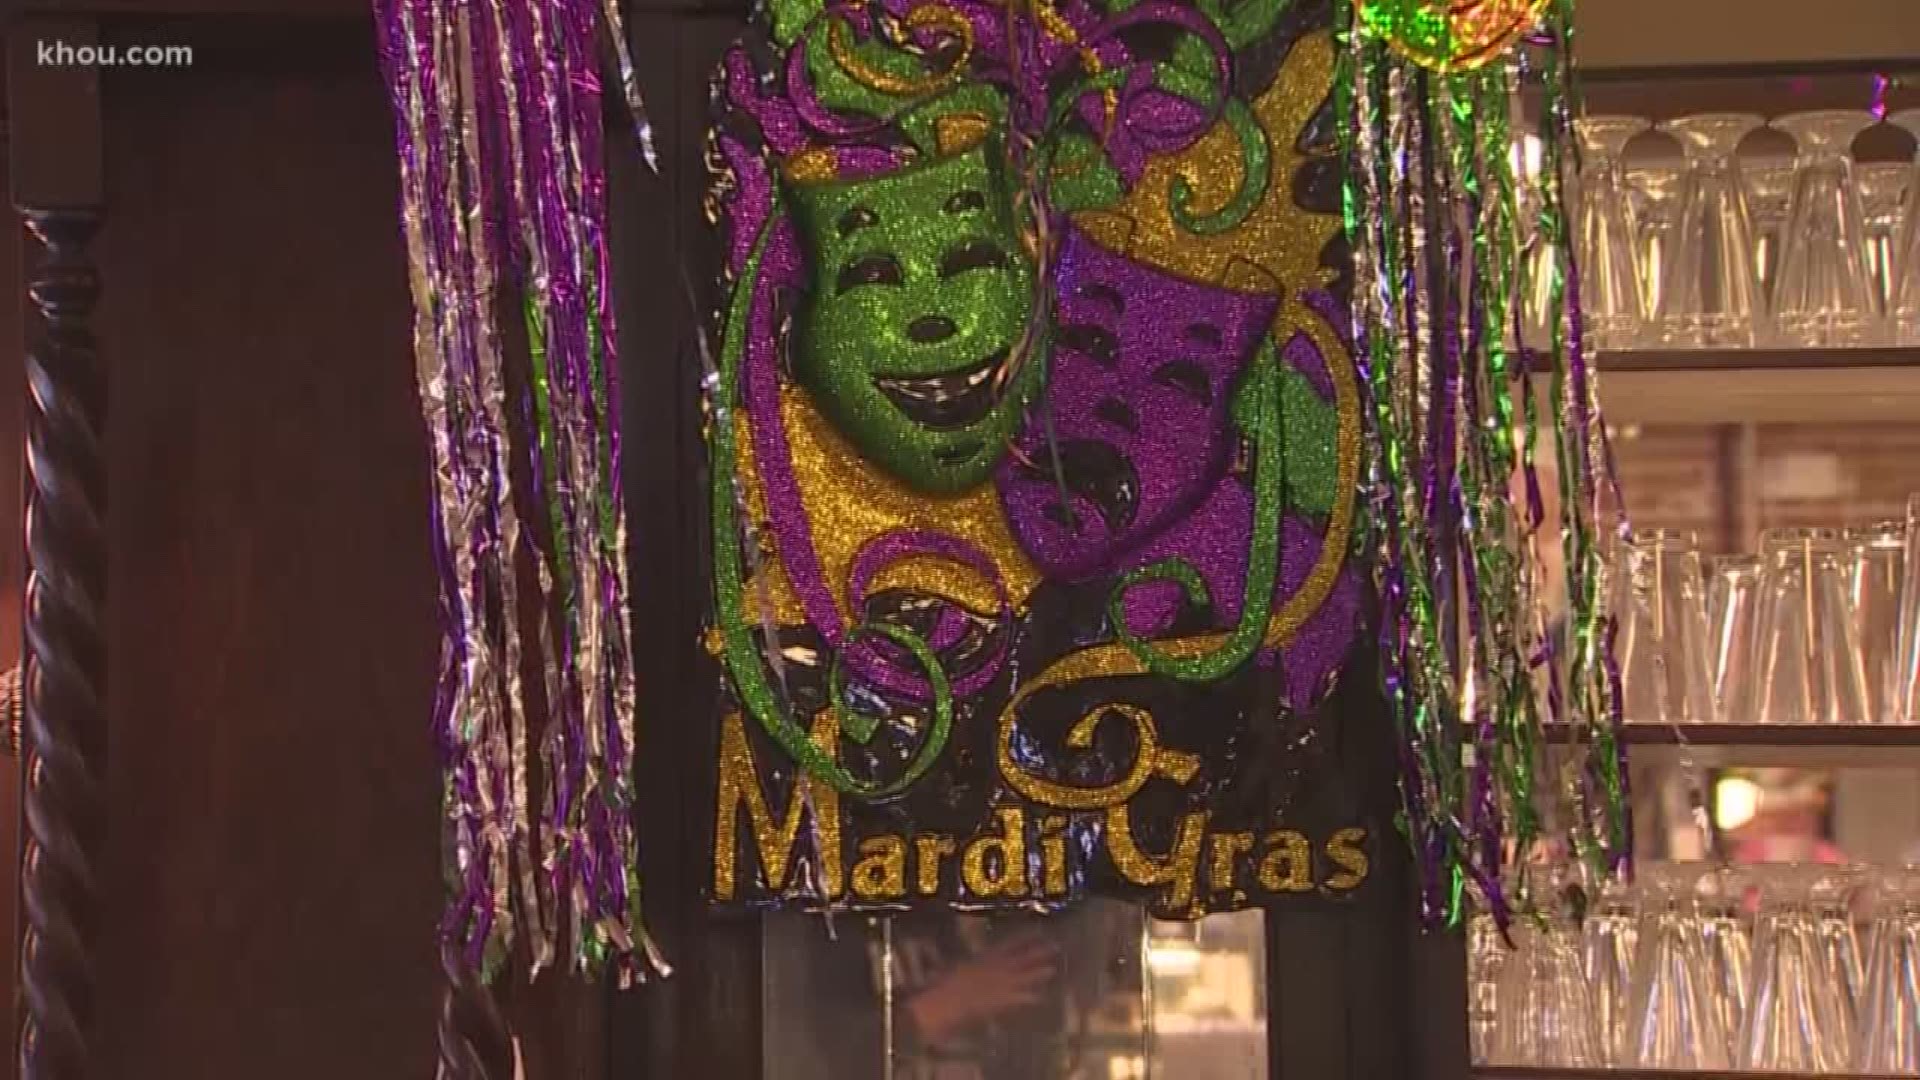 A lawsuit against the City of Galveston that could have potentially put its Mardi Gras celebration in jeopardy has been dismissed.